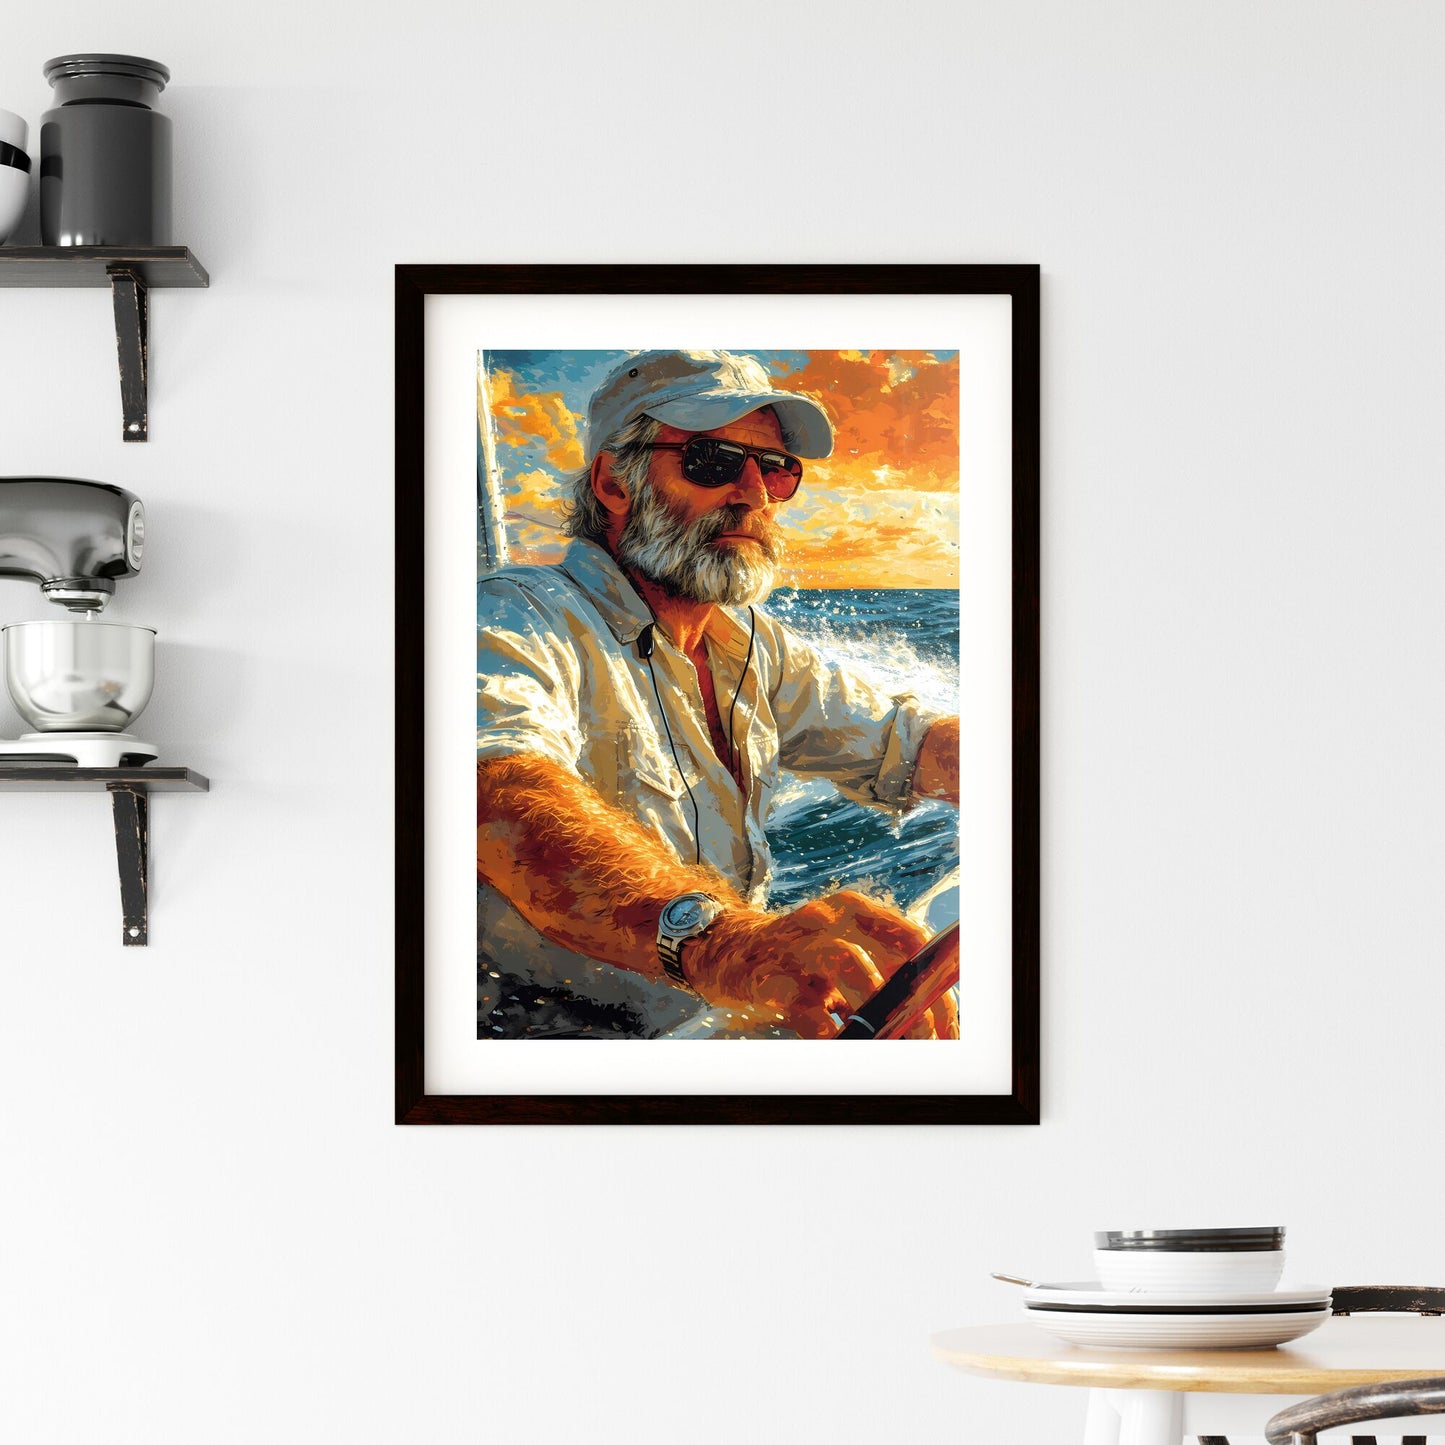 A TRENDY young GAMER - Art print of a man driving a boat Default Title